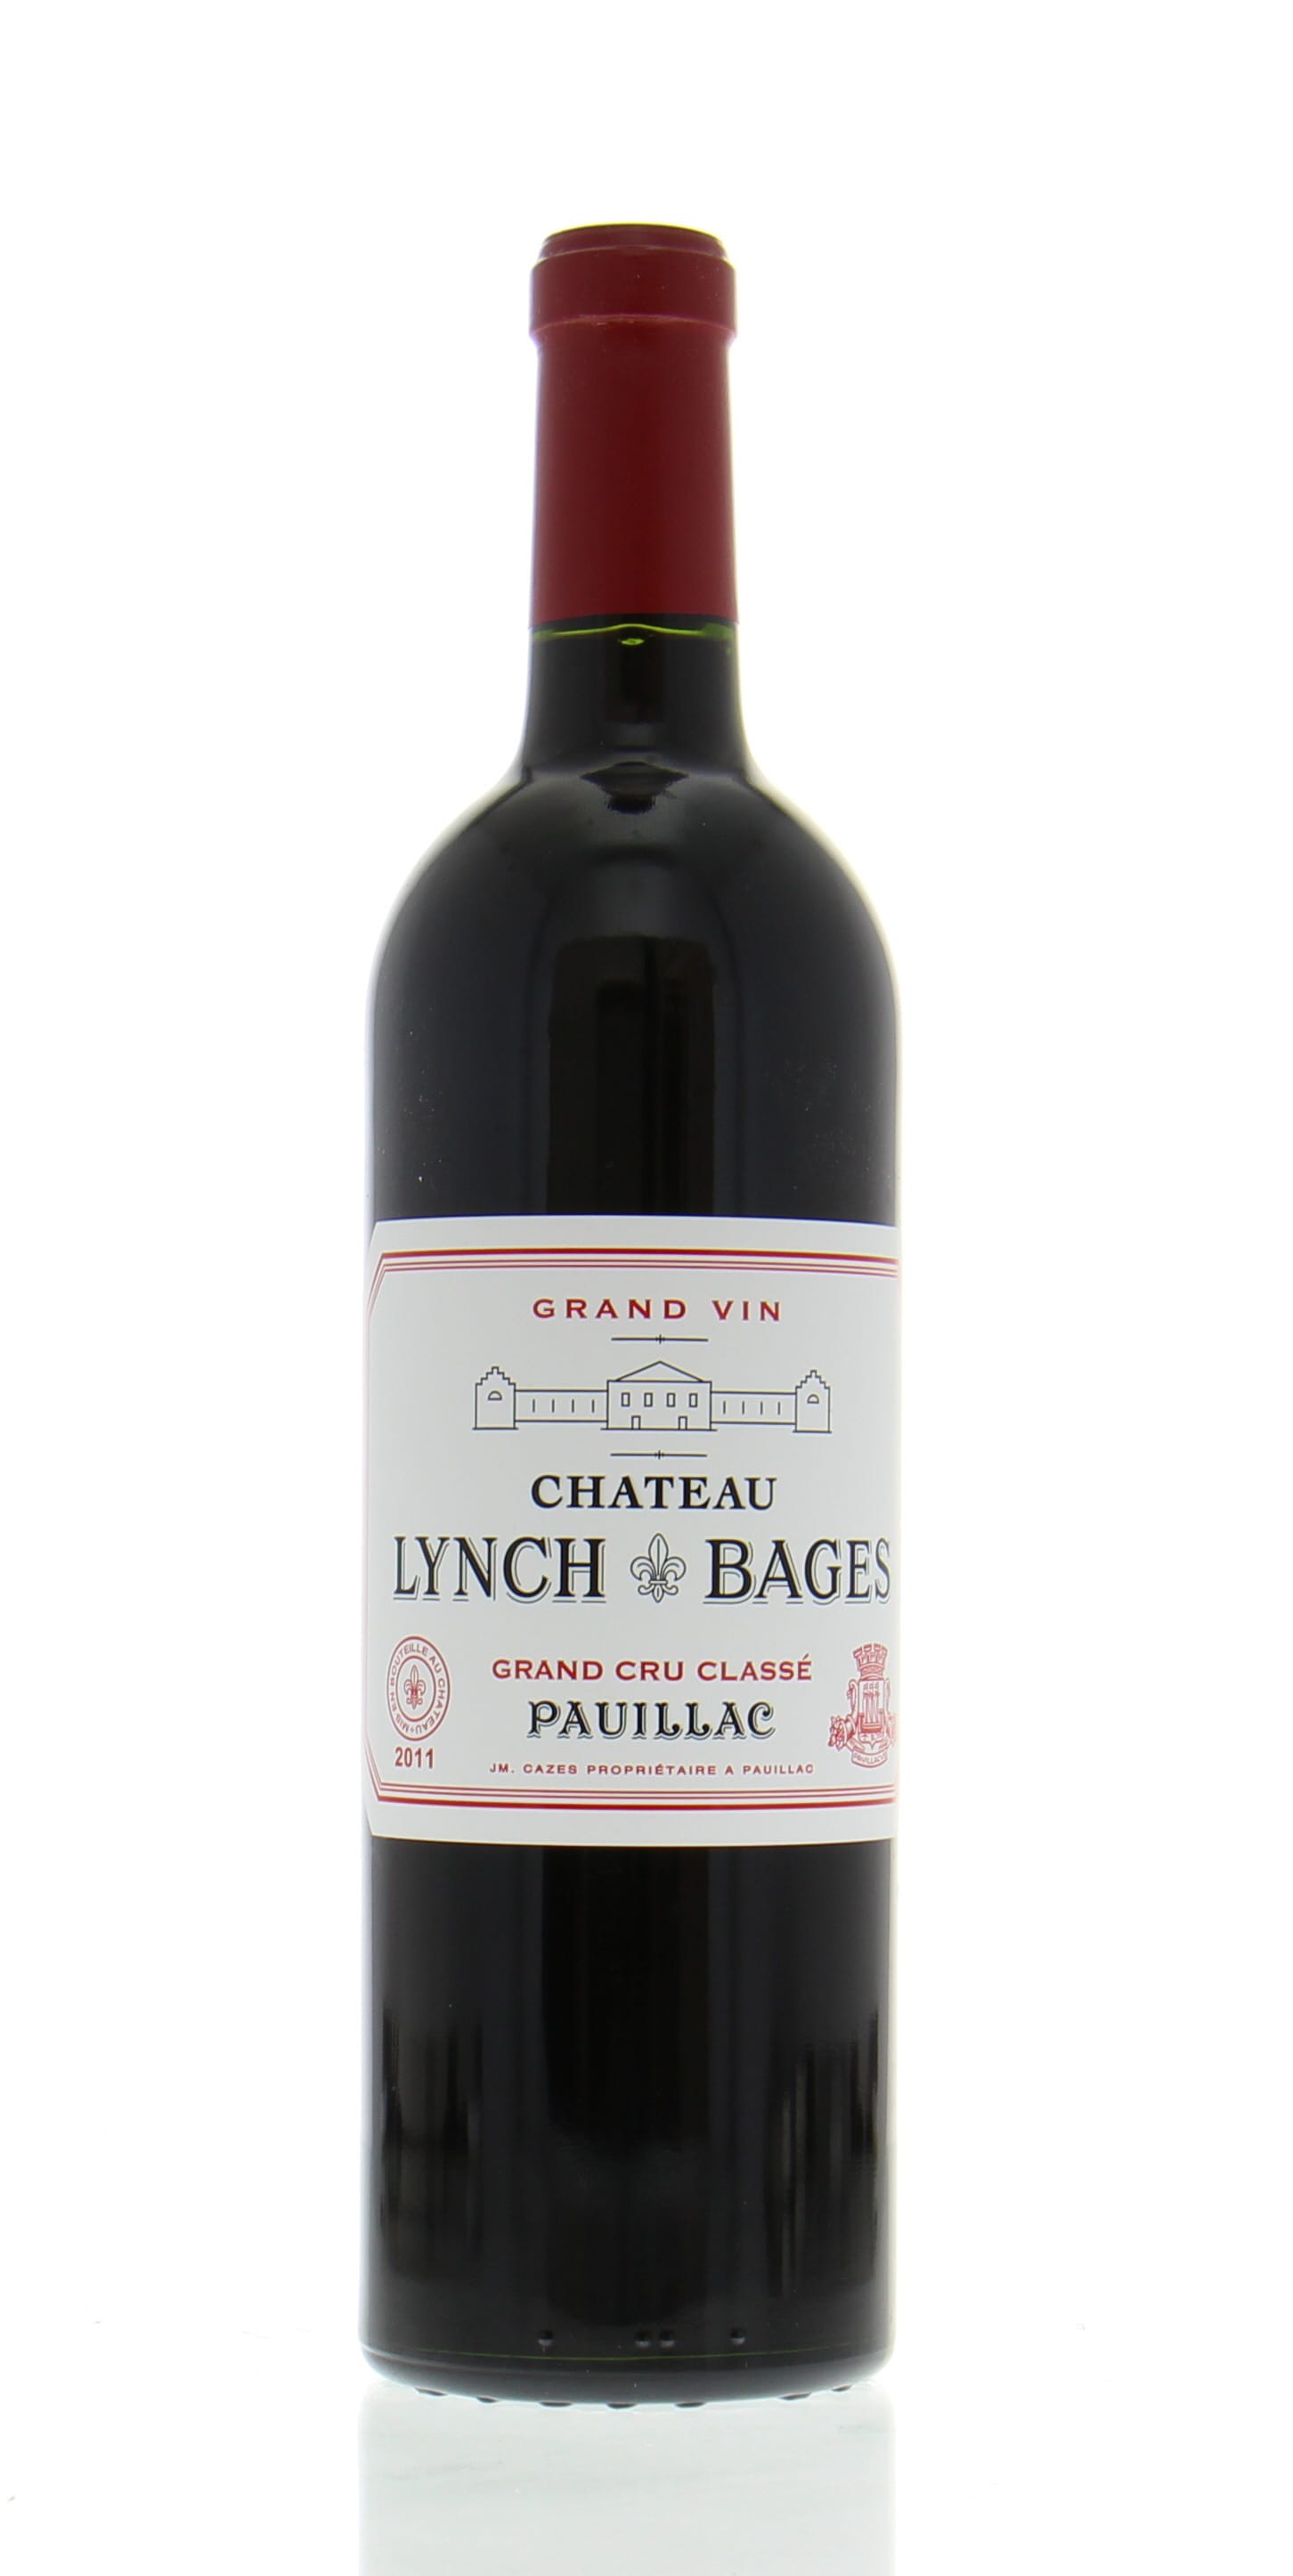 Chateau Lynch Bages - Chateau Lynch Bages 2011 Perfect